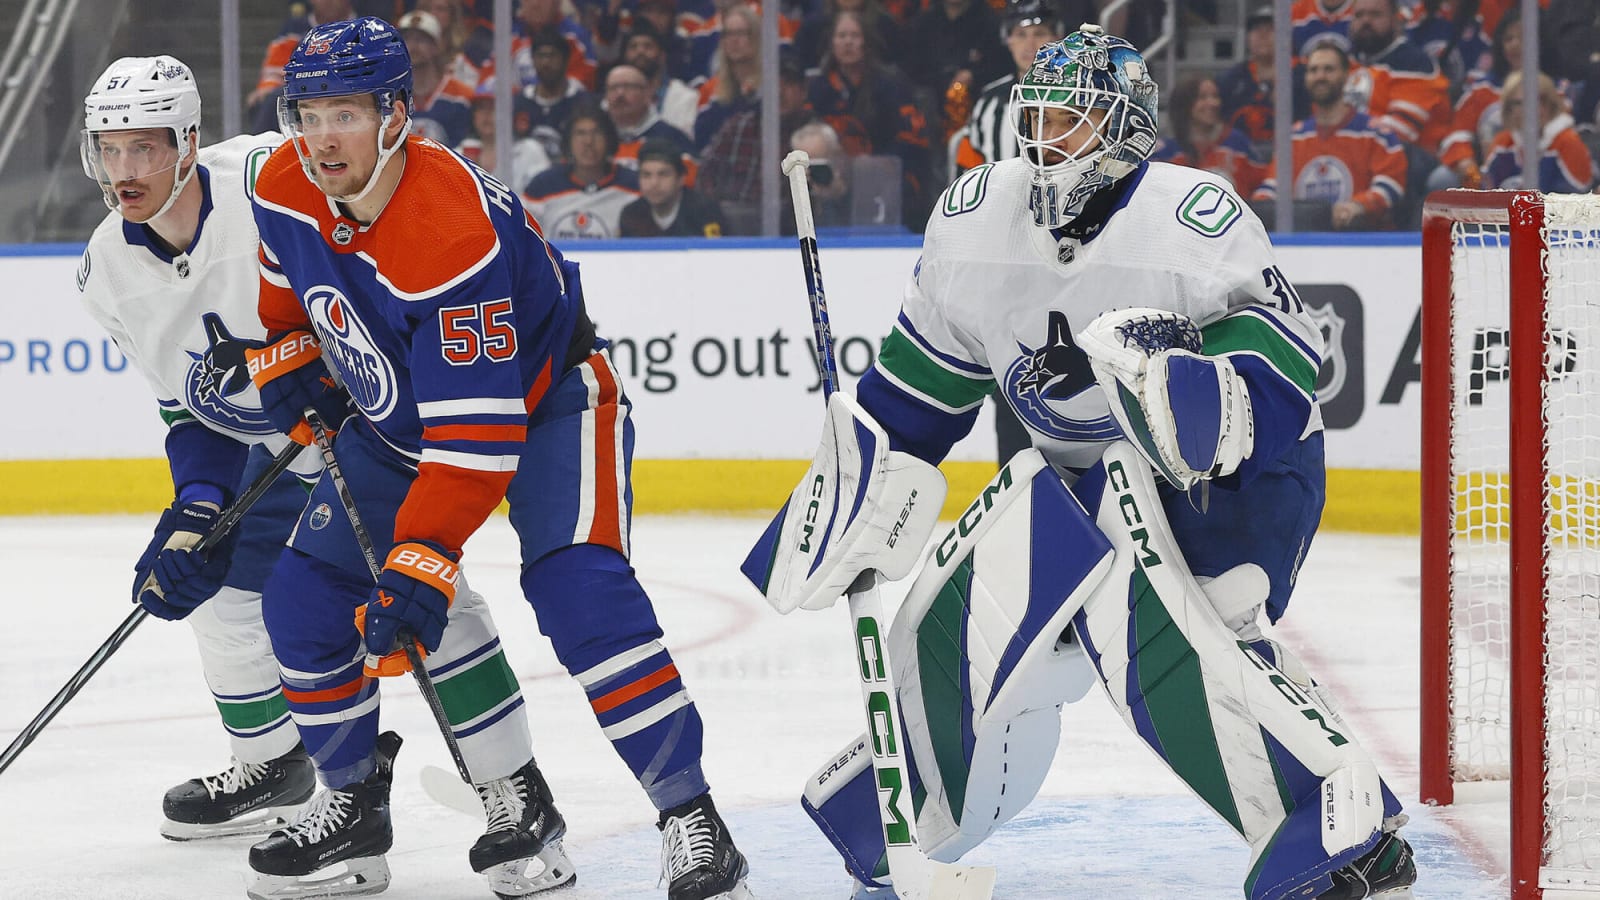 Edmonton Oilers vs. Vancouver Canucks Game 4: A Tactical Review